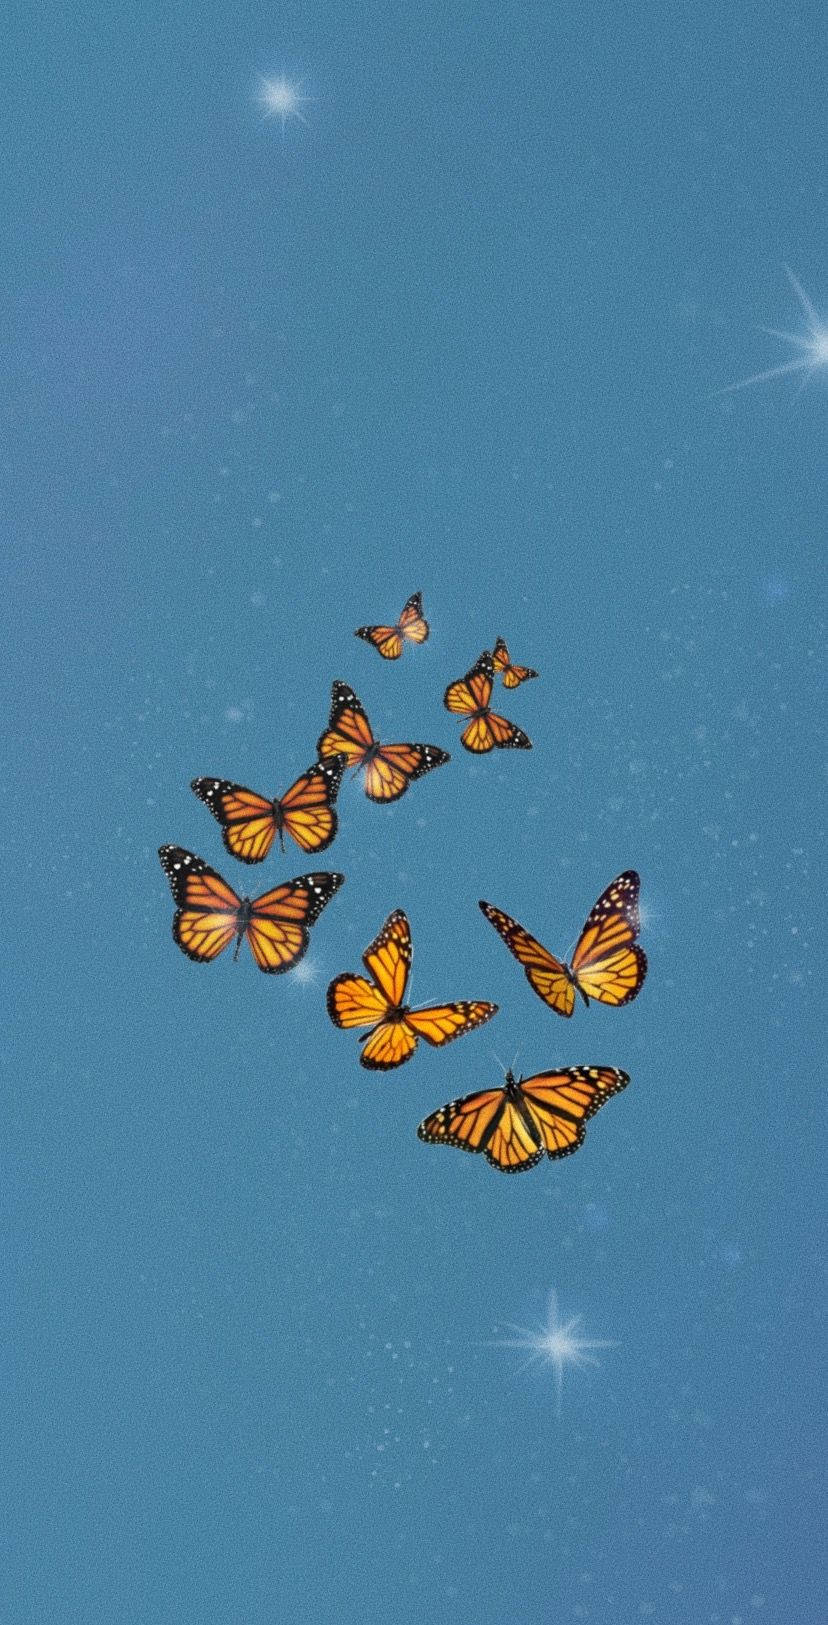 Butterfly Aesthetic Group Of Monarch Background